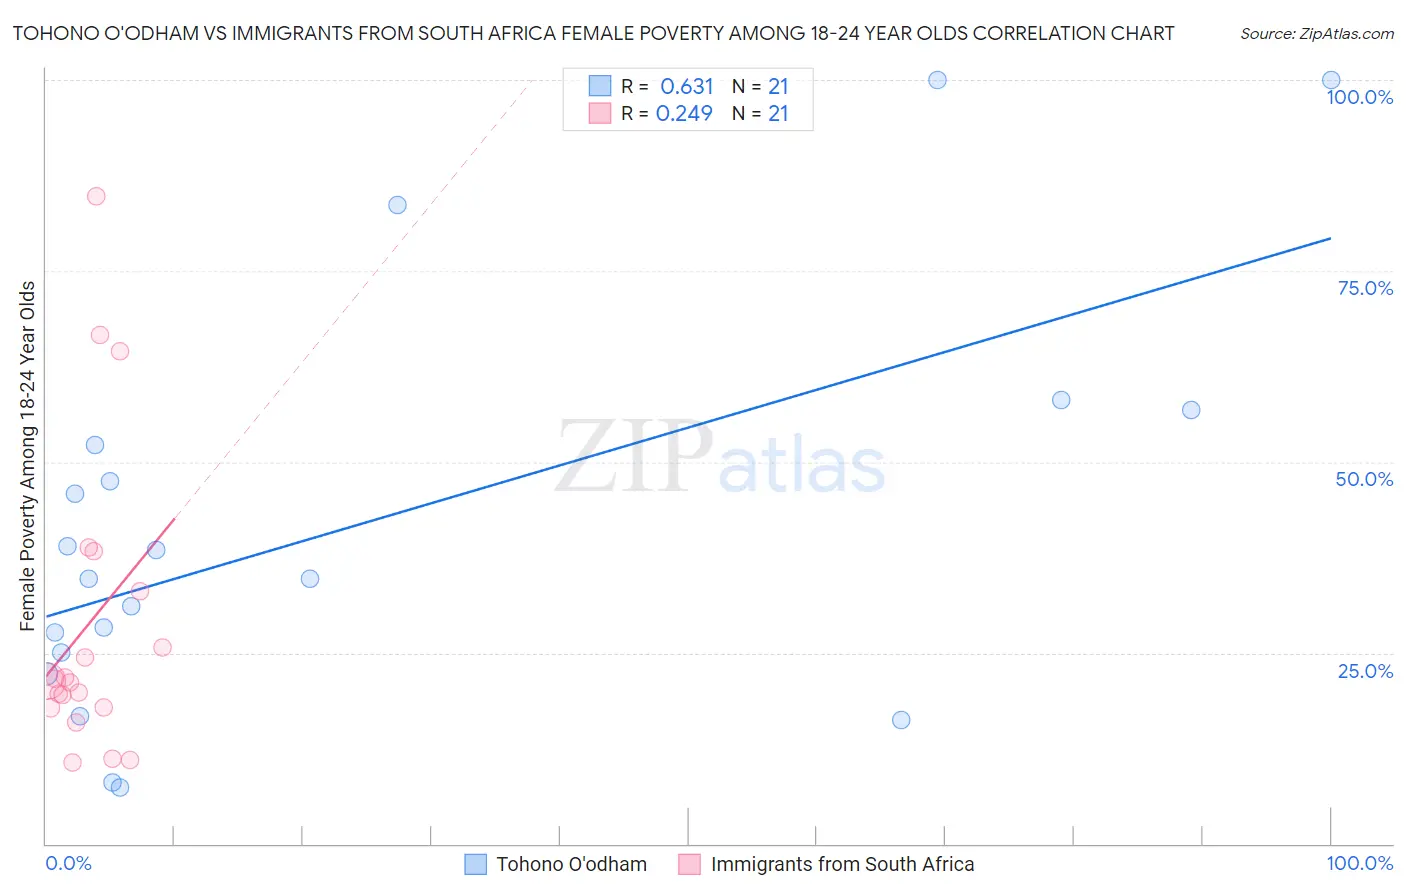 Tohono O'odham vs Immigrants from South Africa Female Poverty Among 18-24 Year Olds